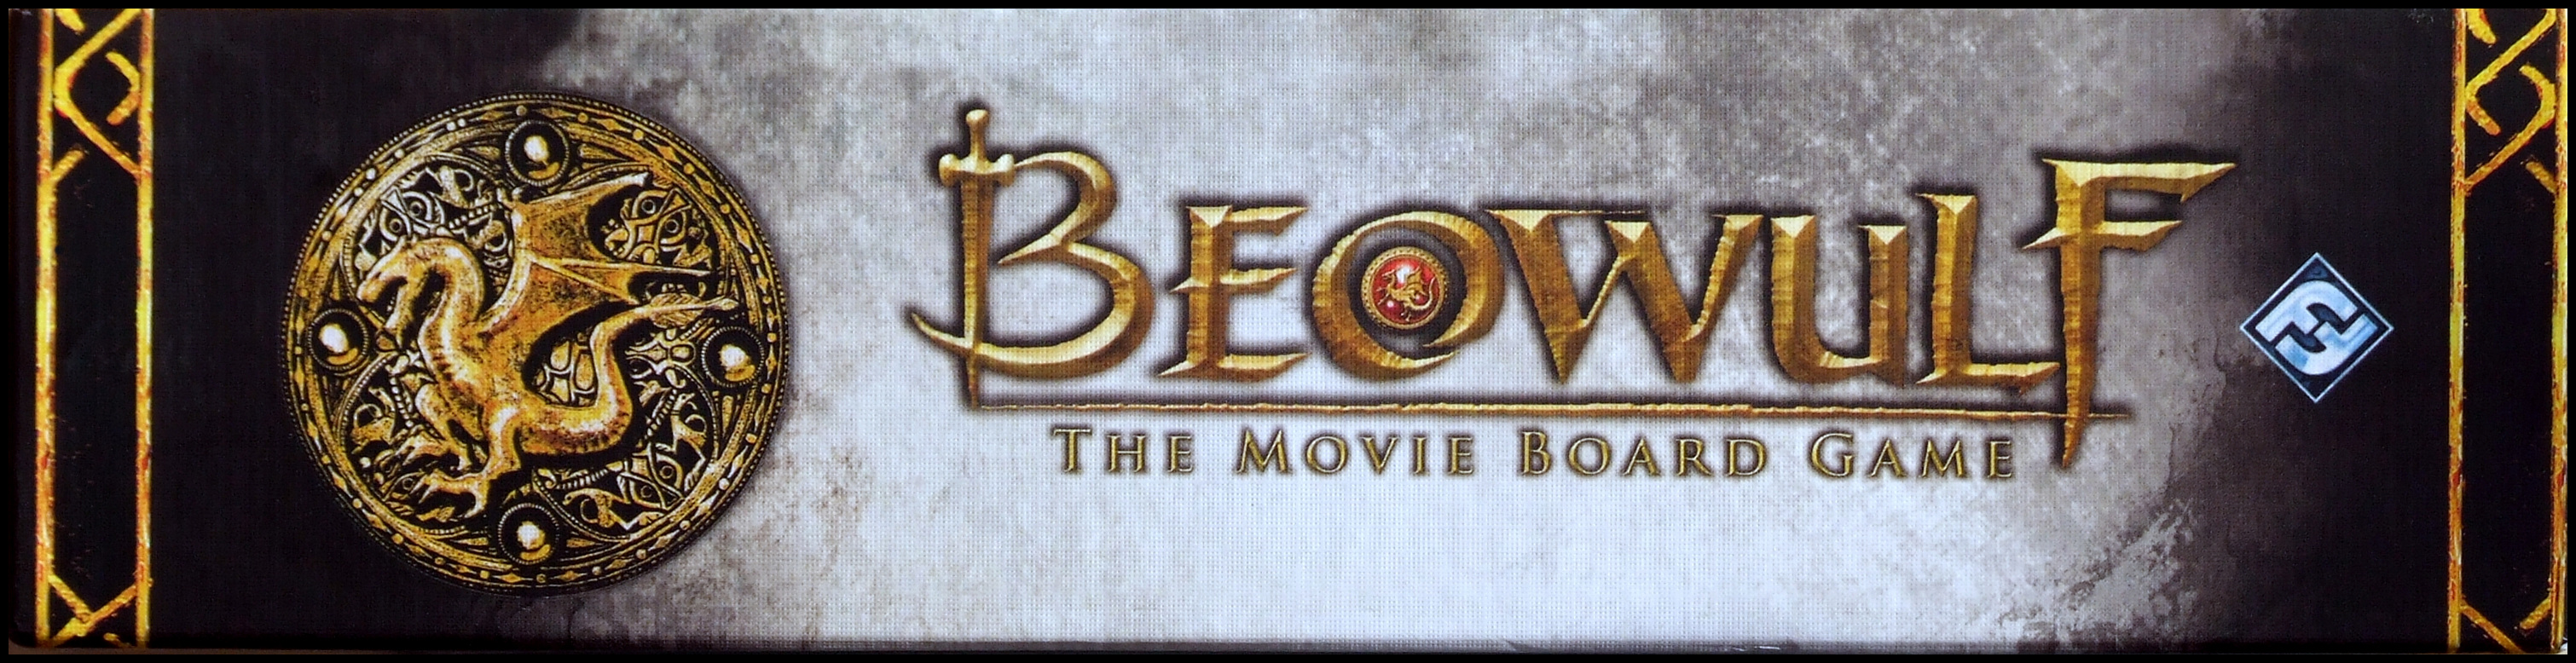 Beowulf: The Movie Board Game - Box Side 2